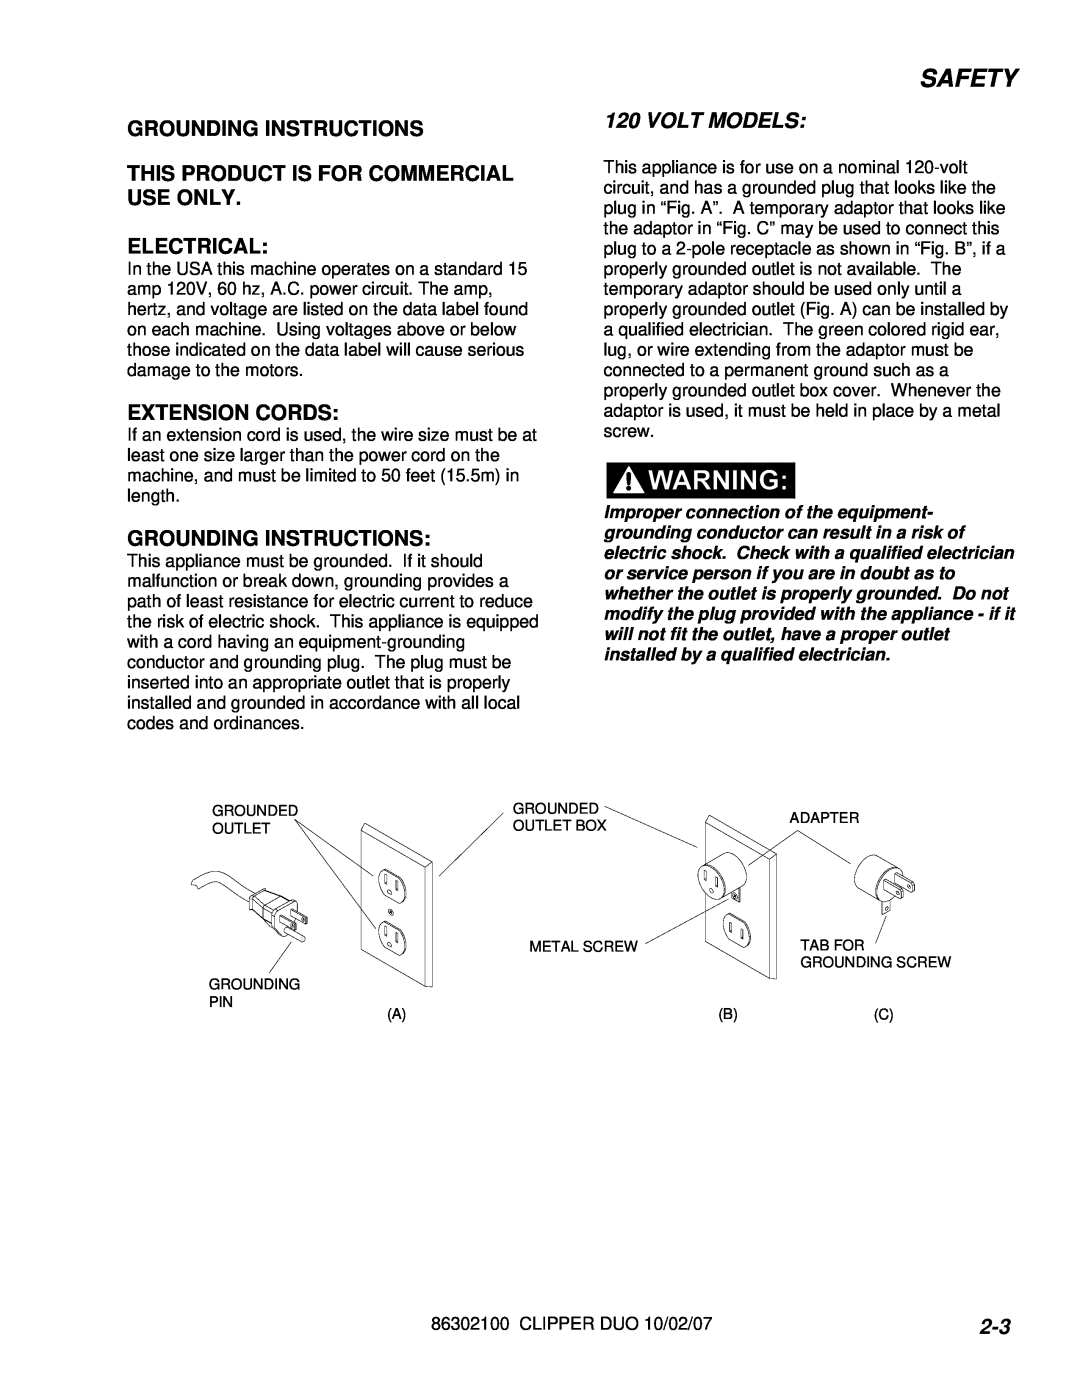 Windsor 10080480 Grounding Instructions, This Product Is For Commercial Use Only, Electrical, Extension Cords, Safety 